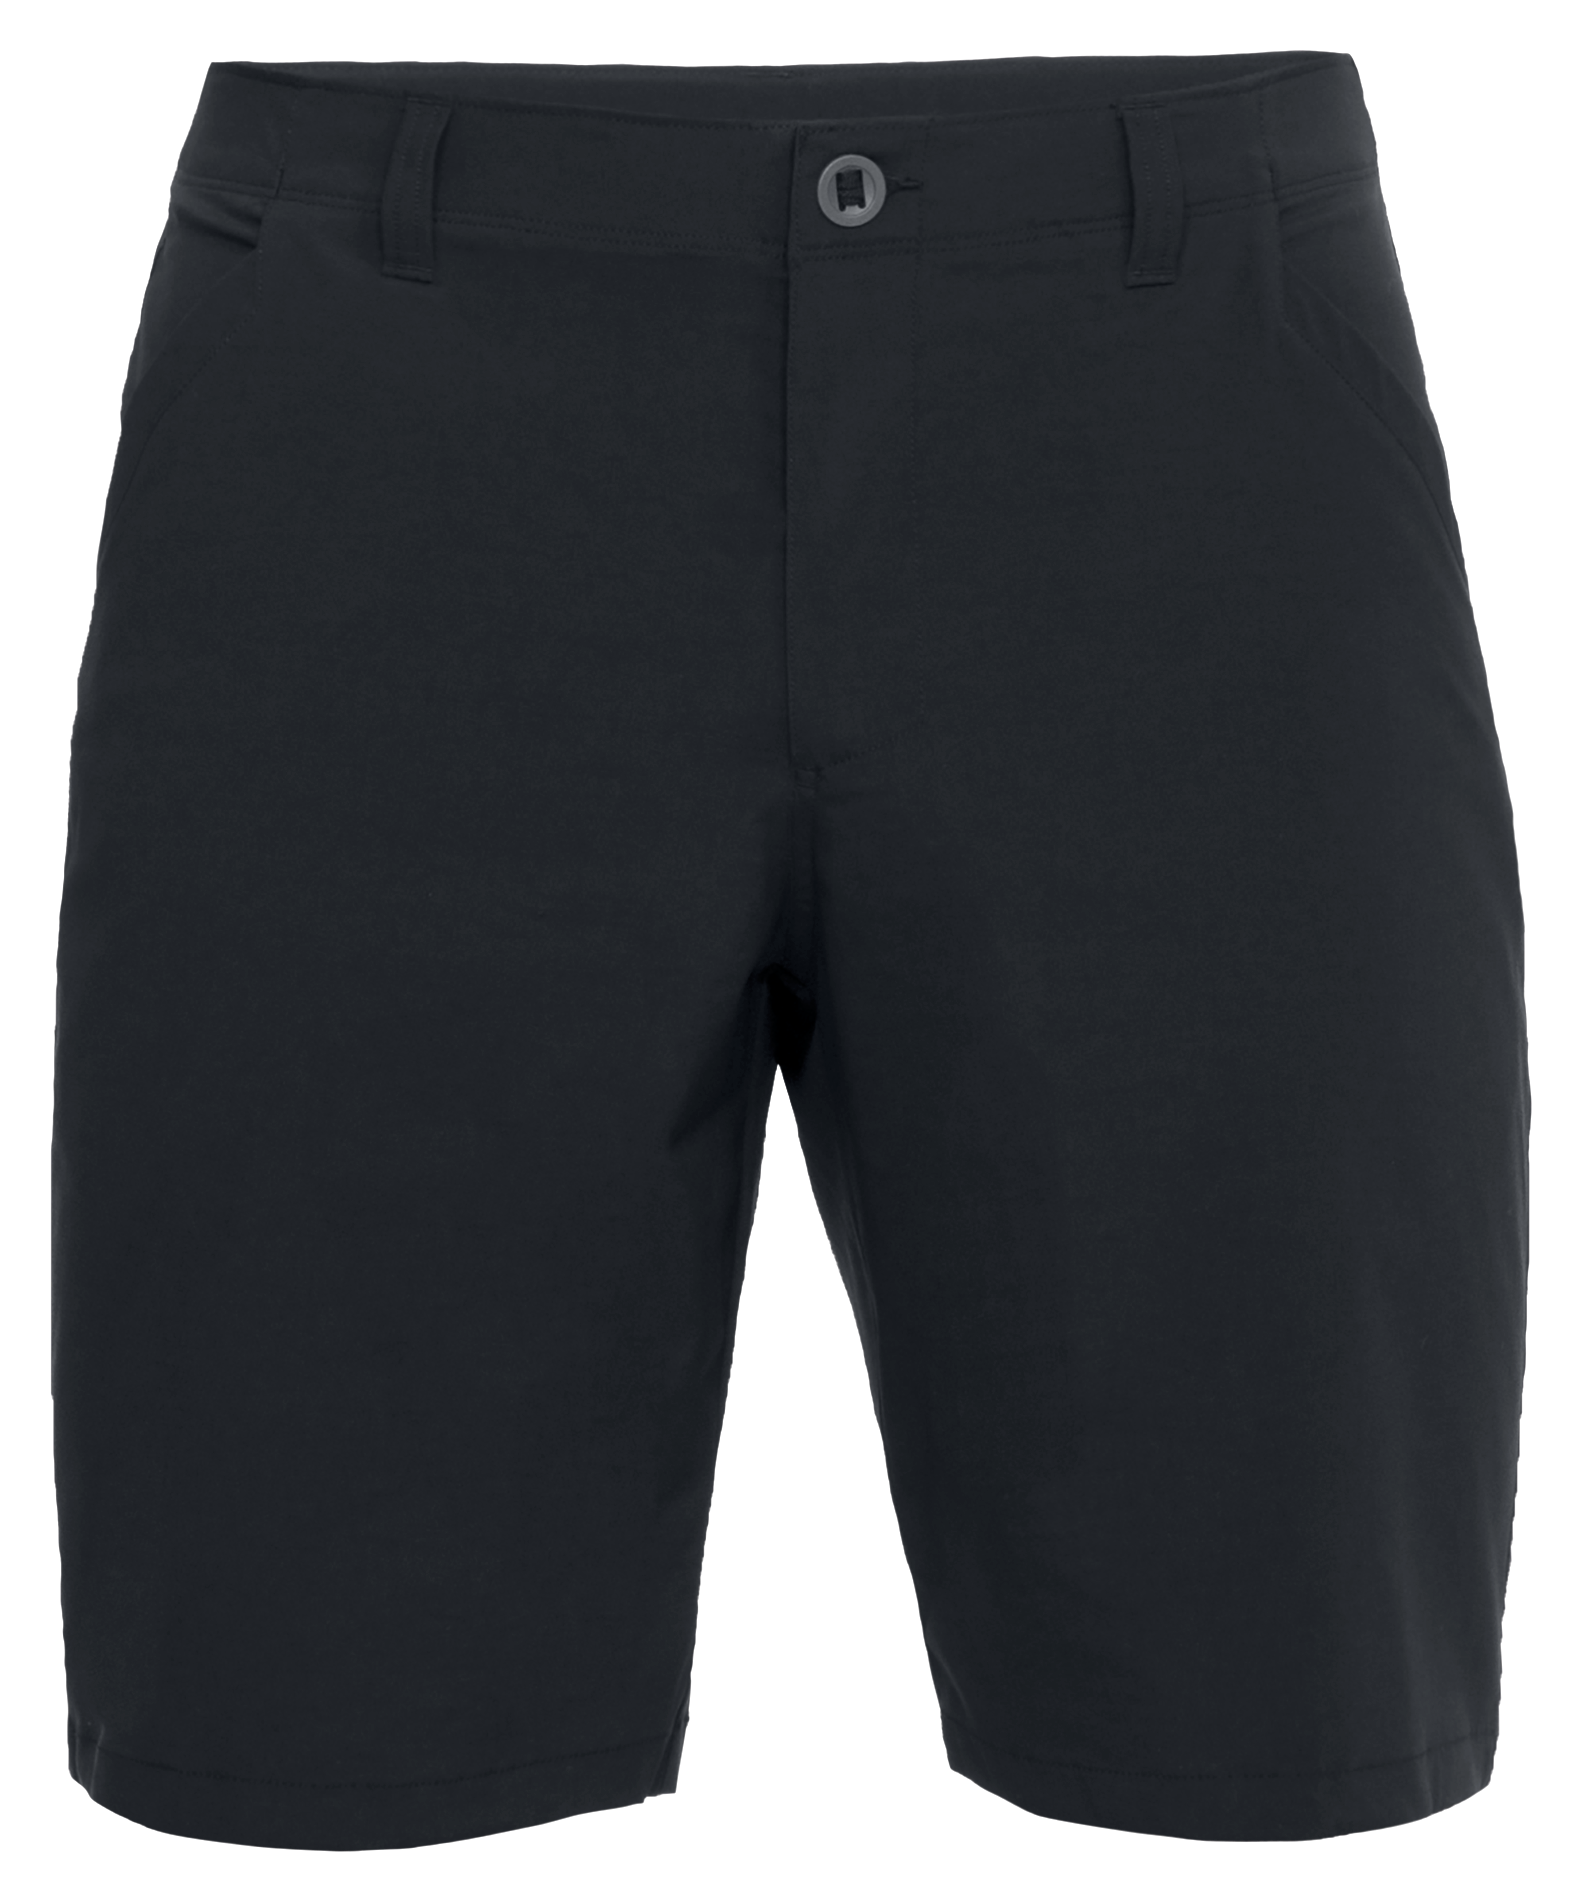 Under Armour Fish Hunter 2.0 Shorts for Men